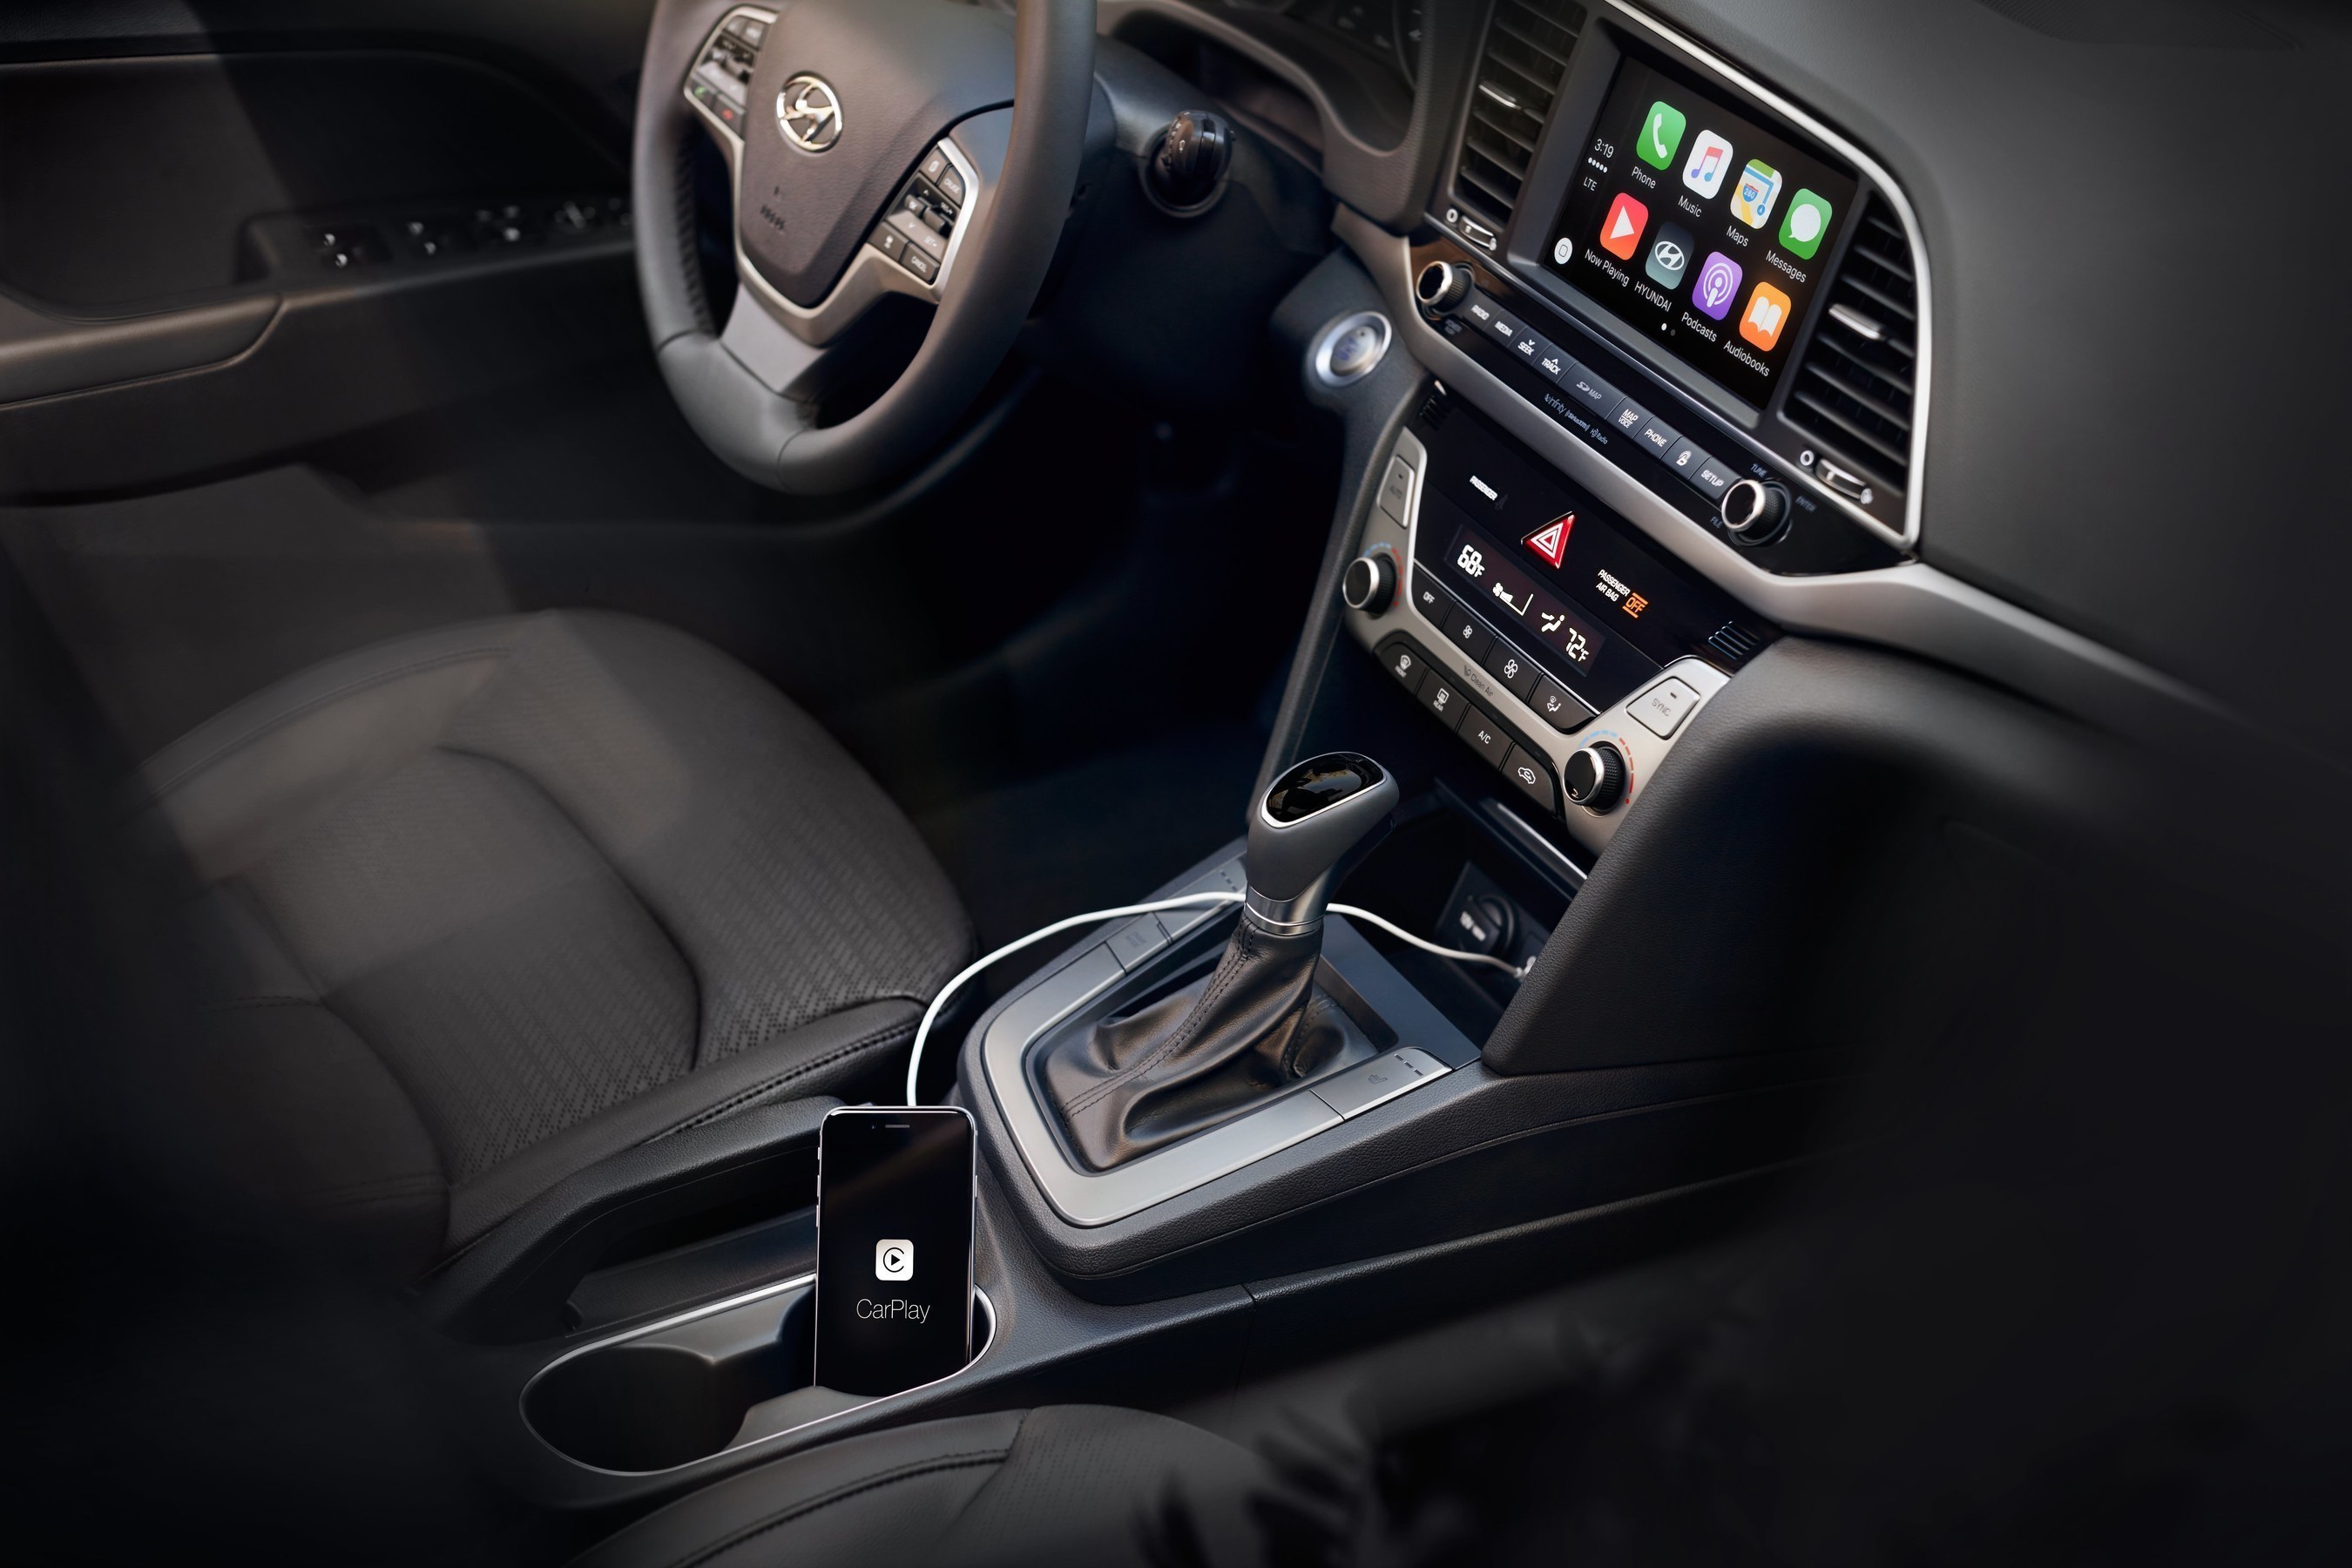 All-New 2017 Hyundai Elantra Launches With Apple CarPlay And